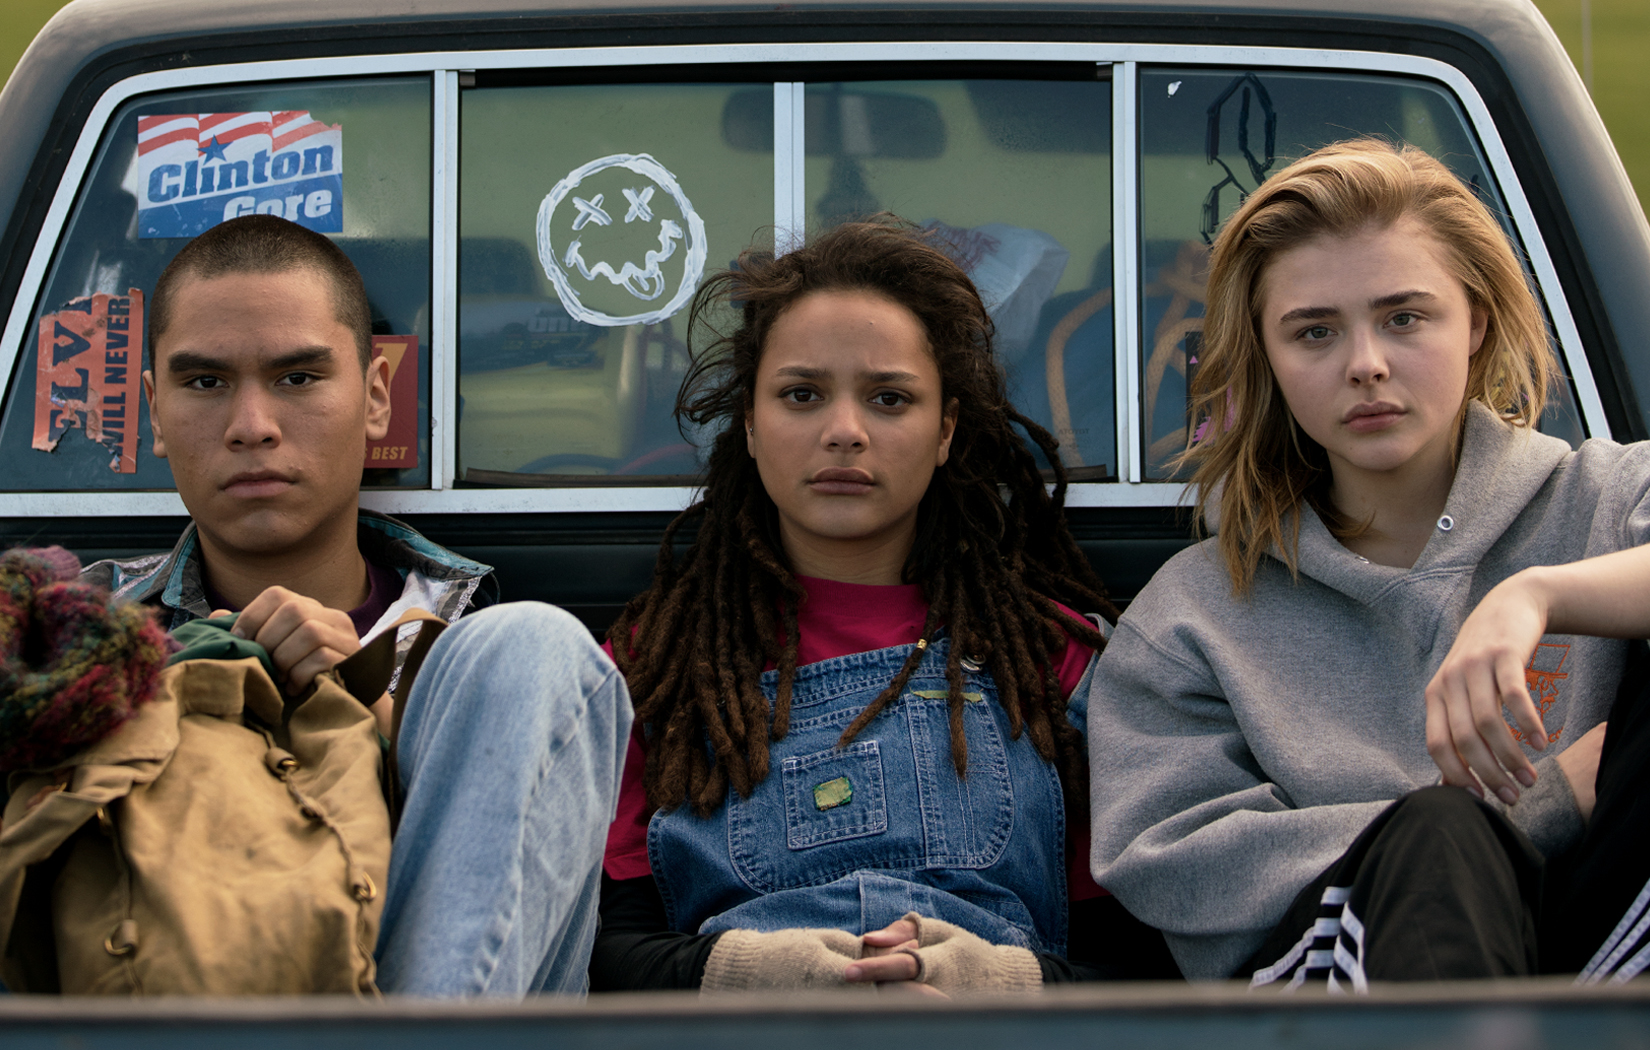 “The Miseducation of Cameron Post” was graded by Nat Jencks of Goldcrest Post